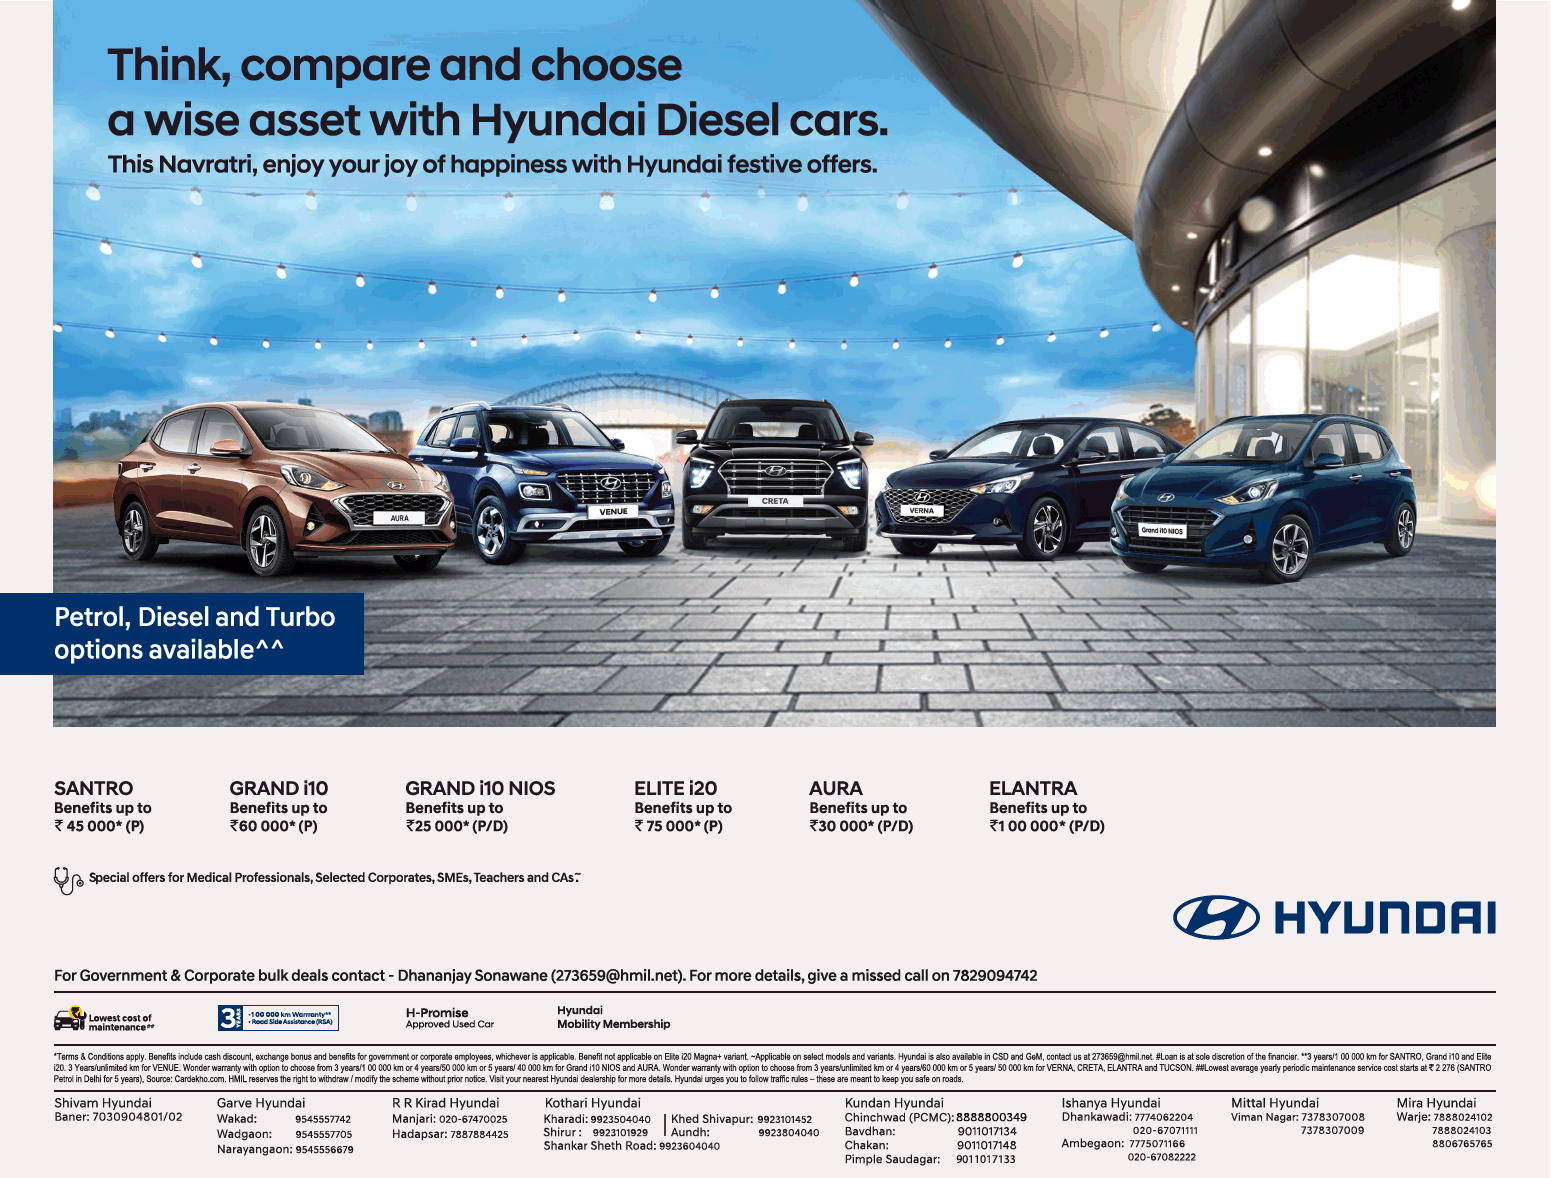 hyundai-think-compare-and-choose-a-wise-asset-with-hyundai-diesel-cars-ad-toi-pune-16-10-2020